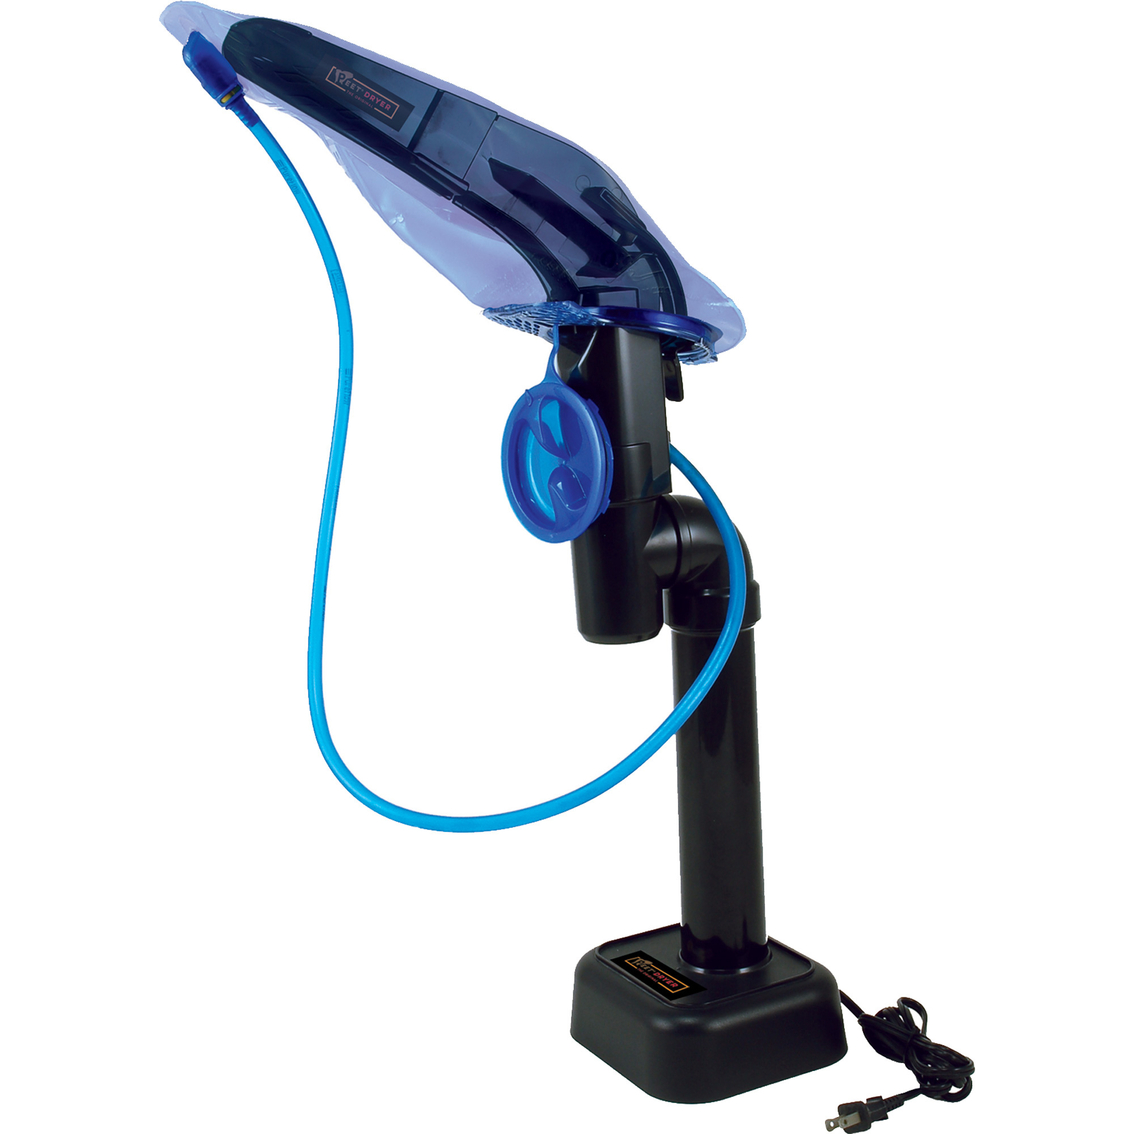 Peet Personal Hydration System Dryer - Image 2 of 2